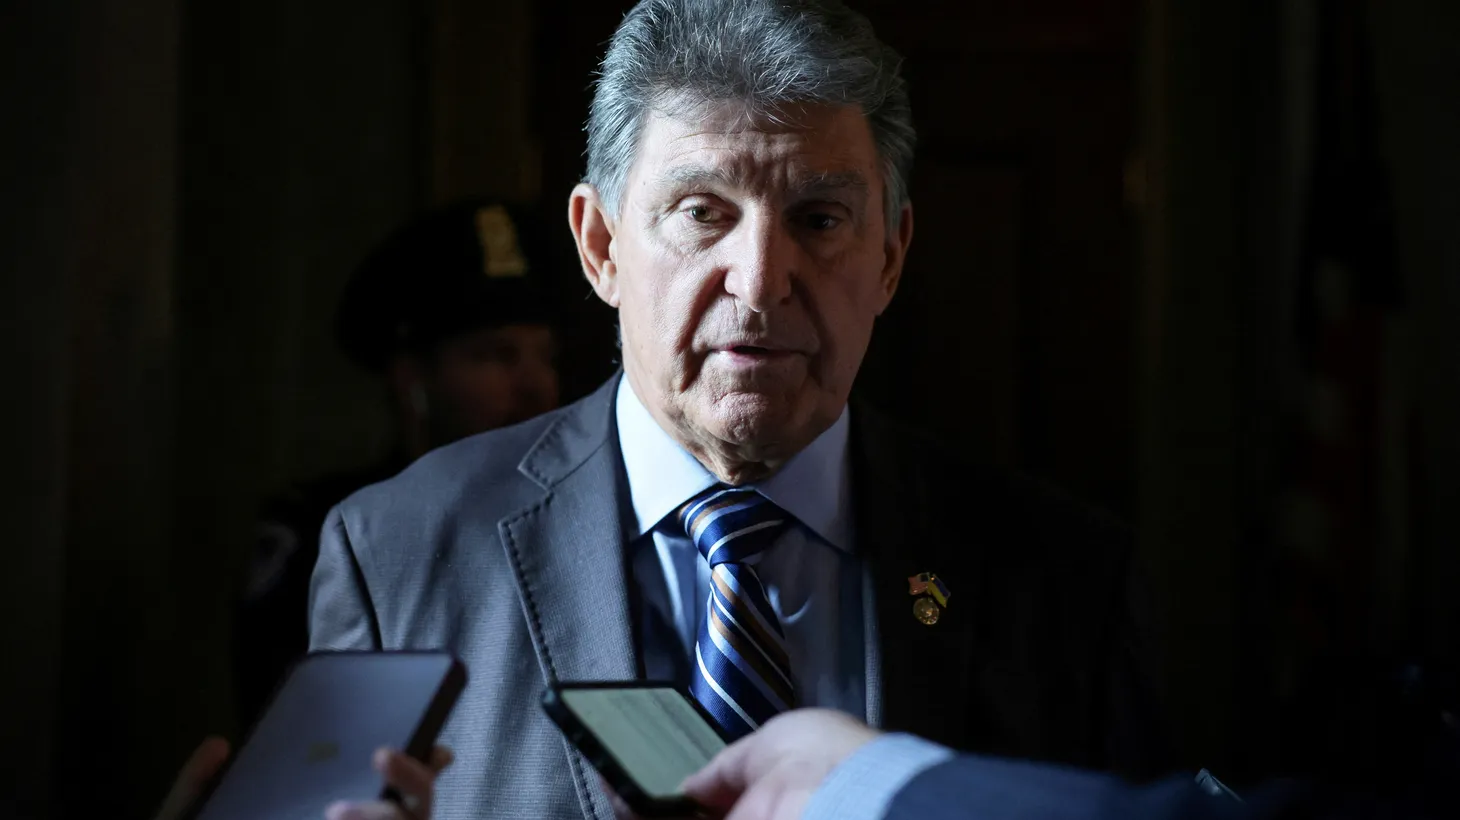 Senator Joe Manchin (D-WV) speaks to journalists in the United States Capitol building in Washington, U.S., May 26, 2022.